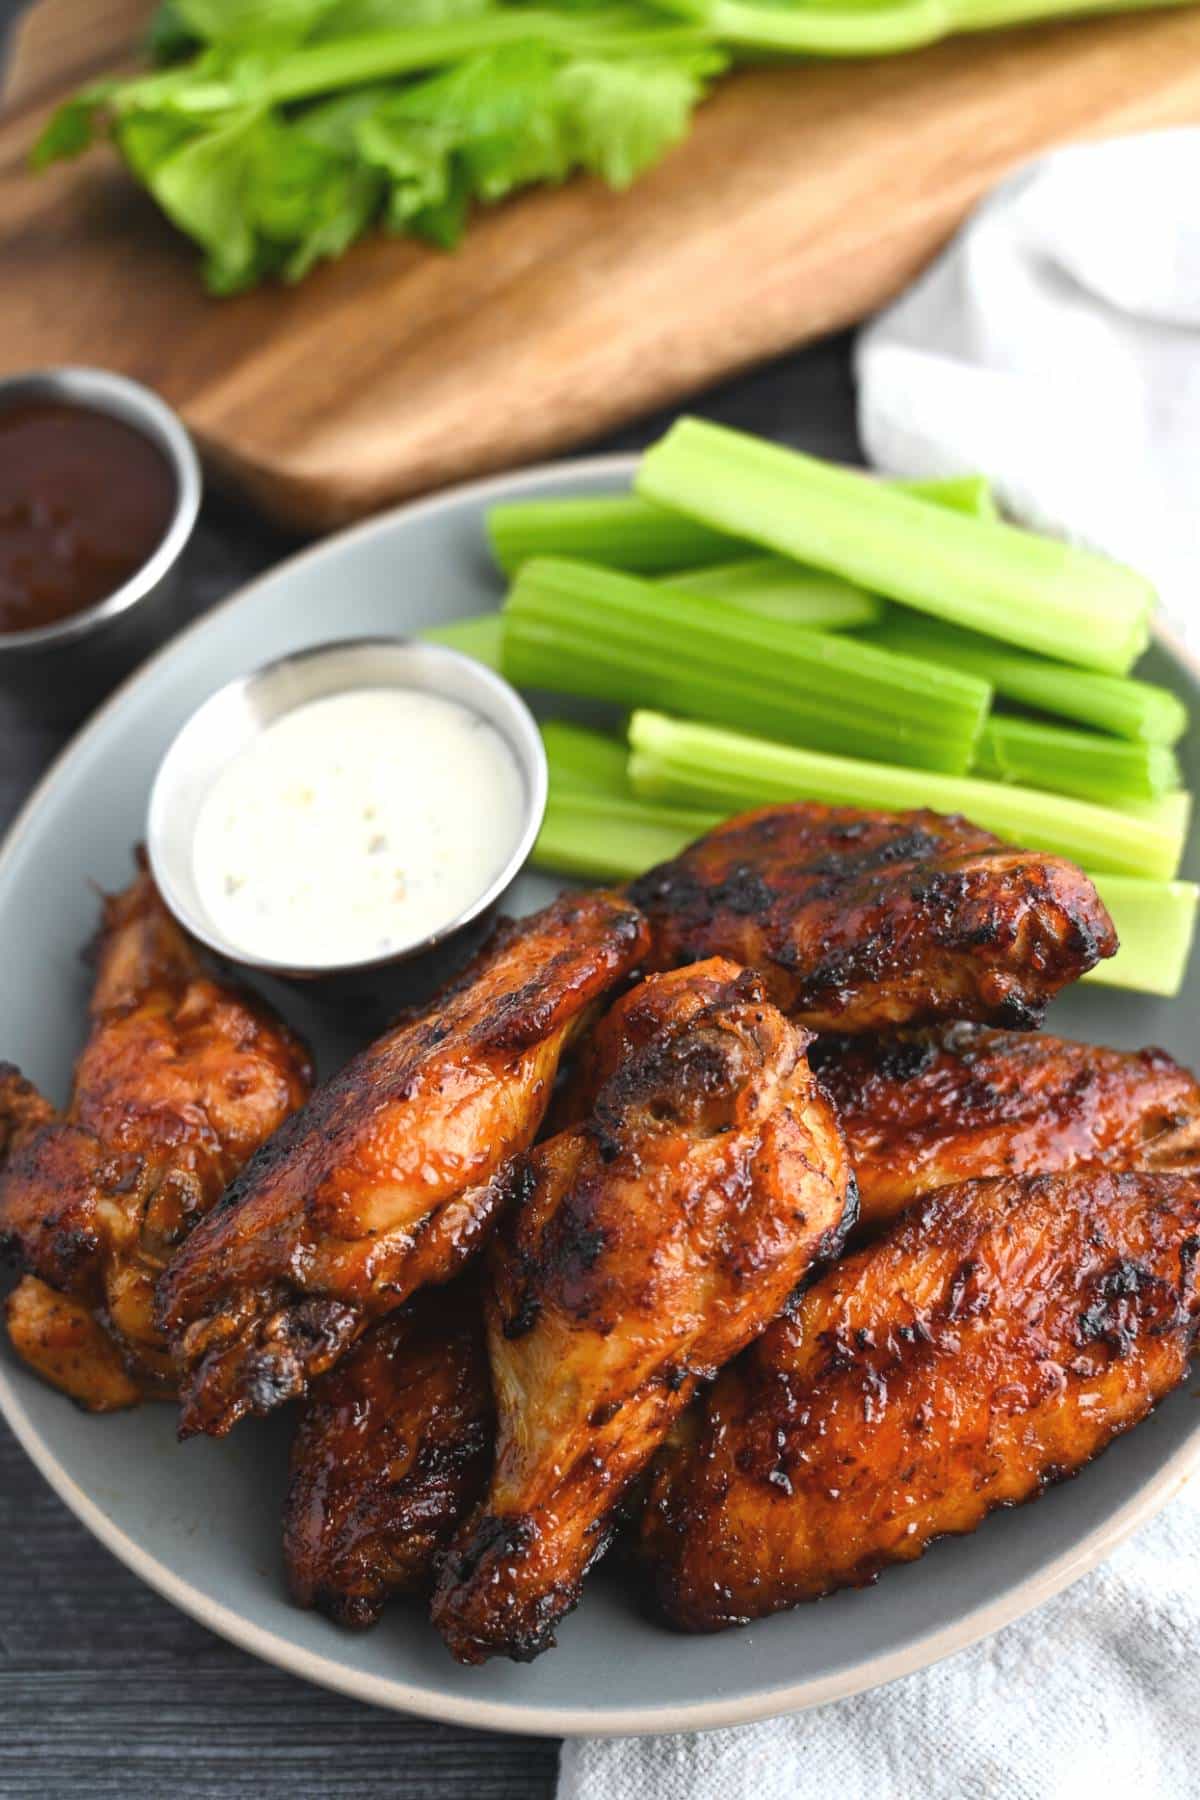 BBQ chicken wings on a plate with celery and a dish of ranch with a cutting board and napkin beside it